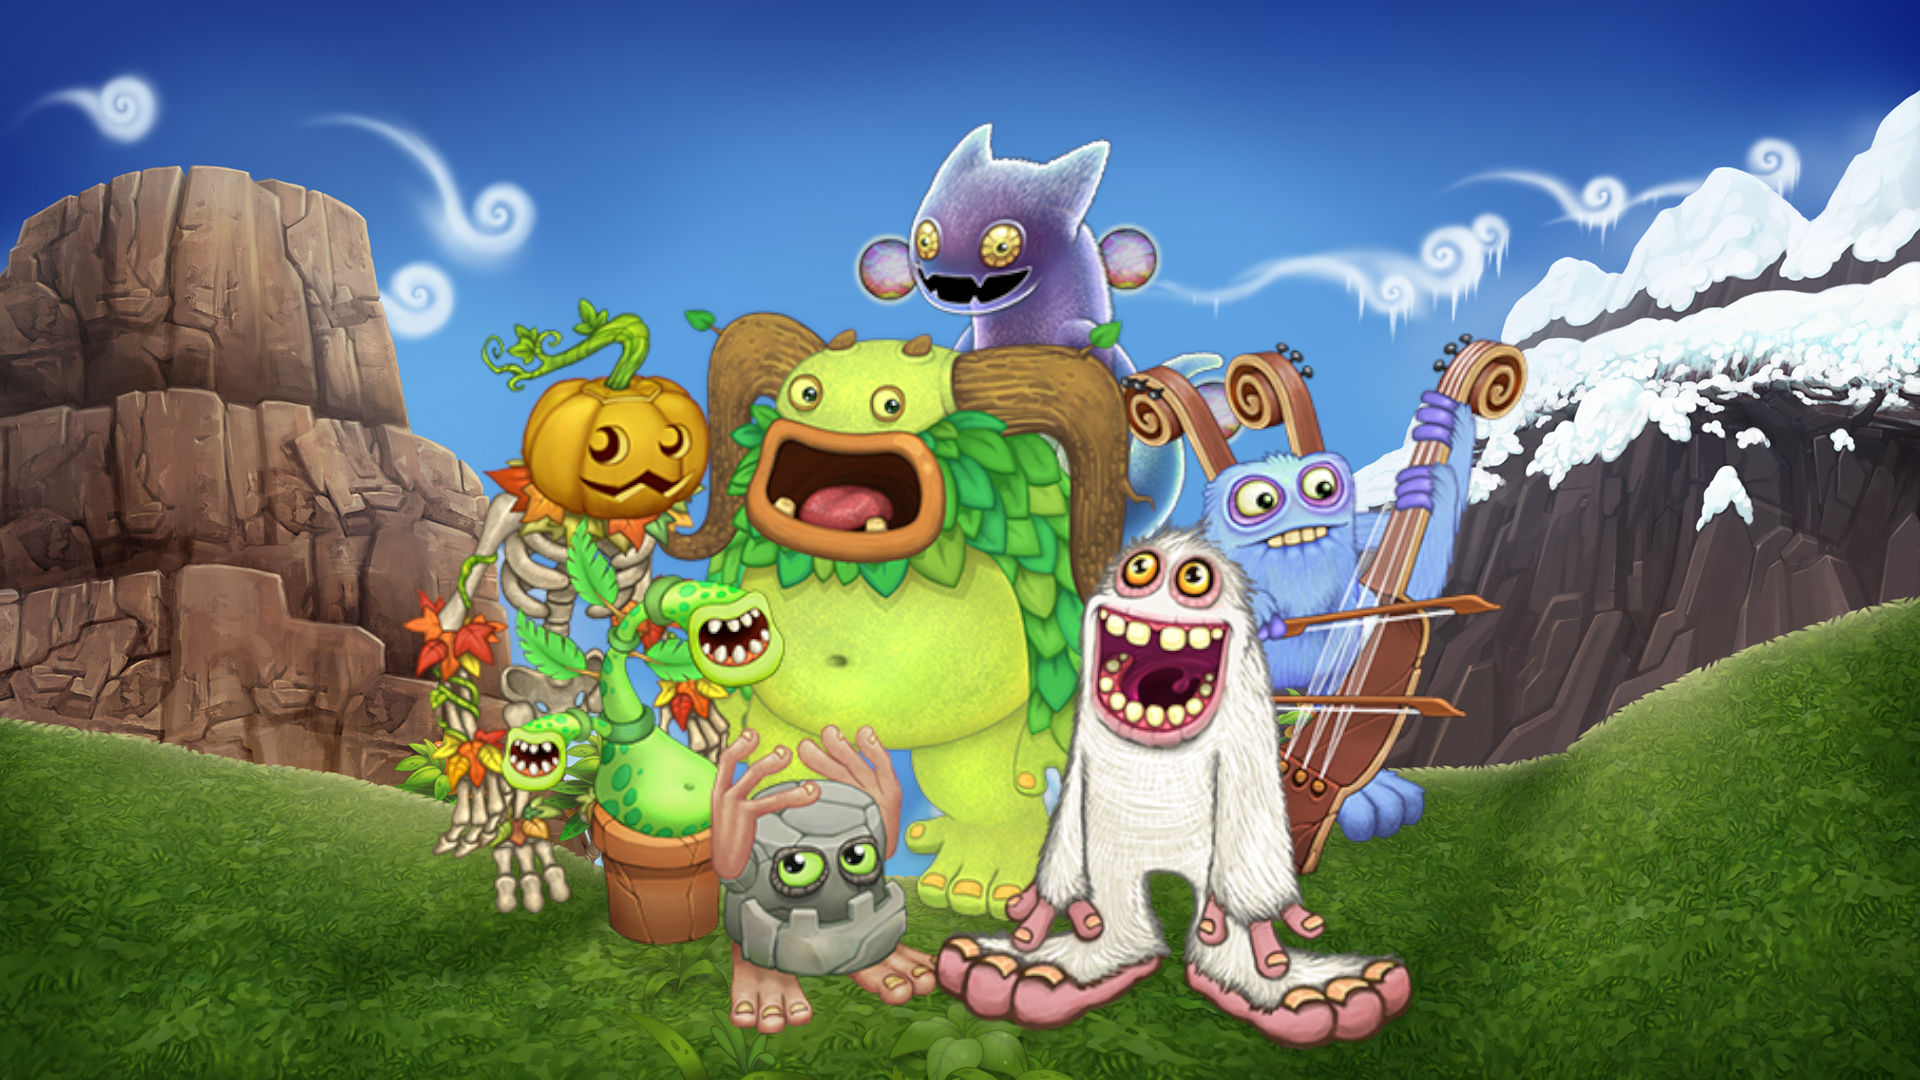 New Mythicals + Gold Island Epic Wubbox??? (My Singing Monsters